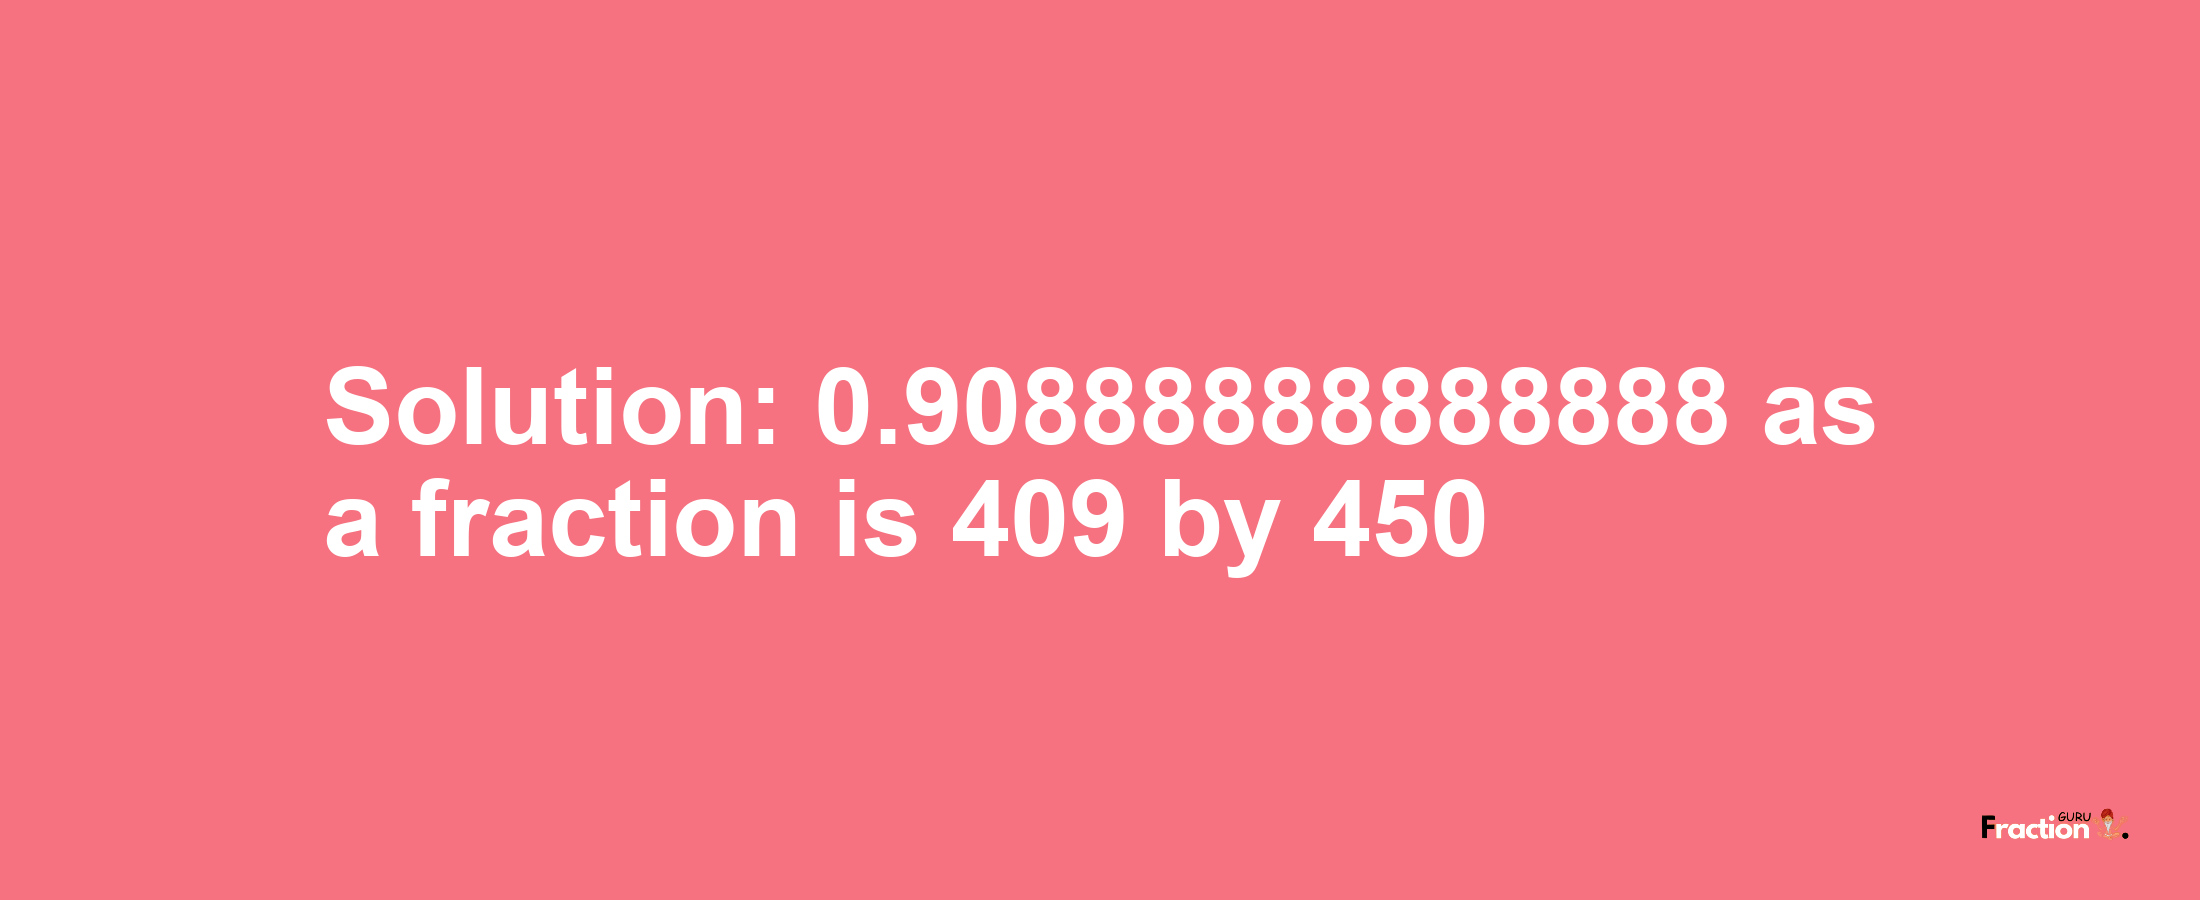 Solution:0.90888888888888 as a fraction is 409/450